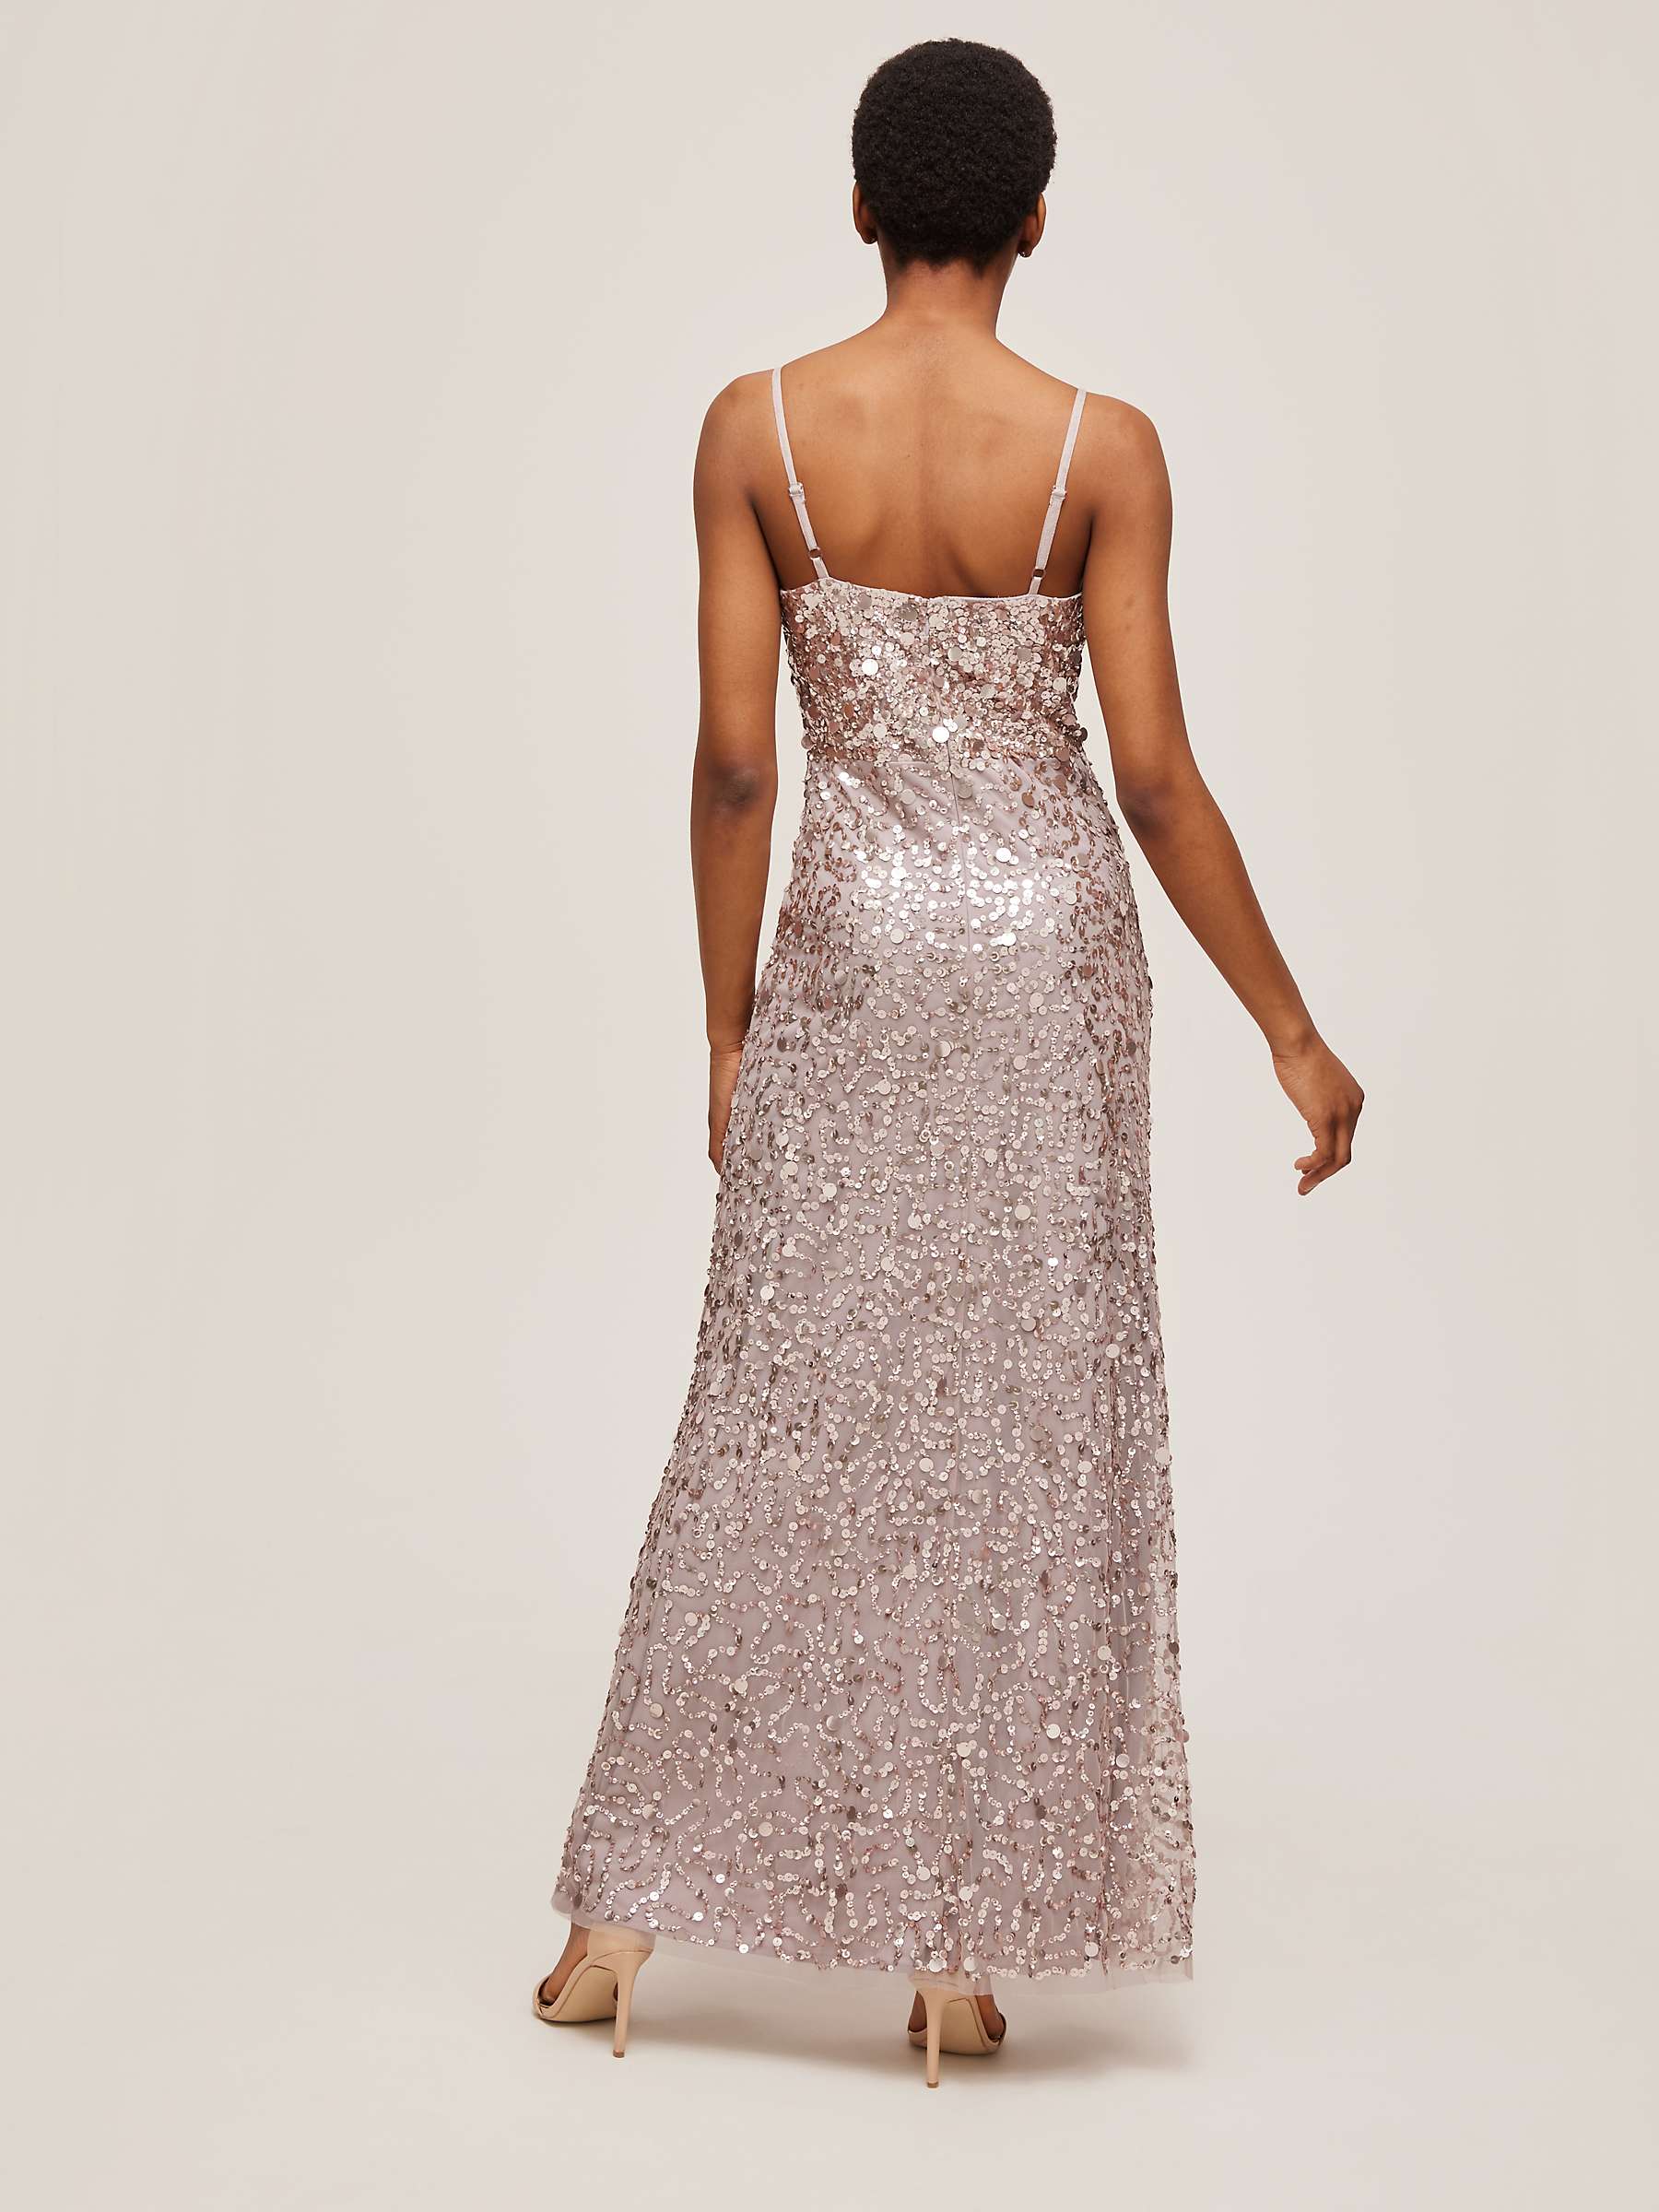 Buy Lace & Beads Betty Bead Embellished Maxi Dress, Champagne Online at johnlewis.com